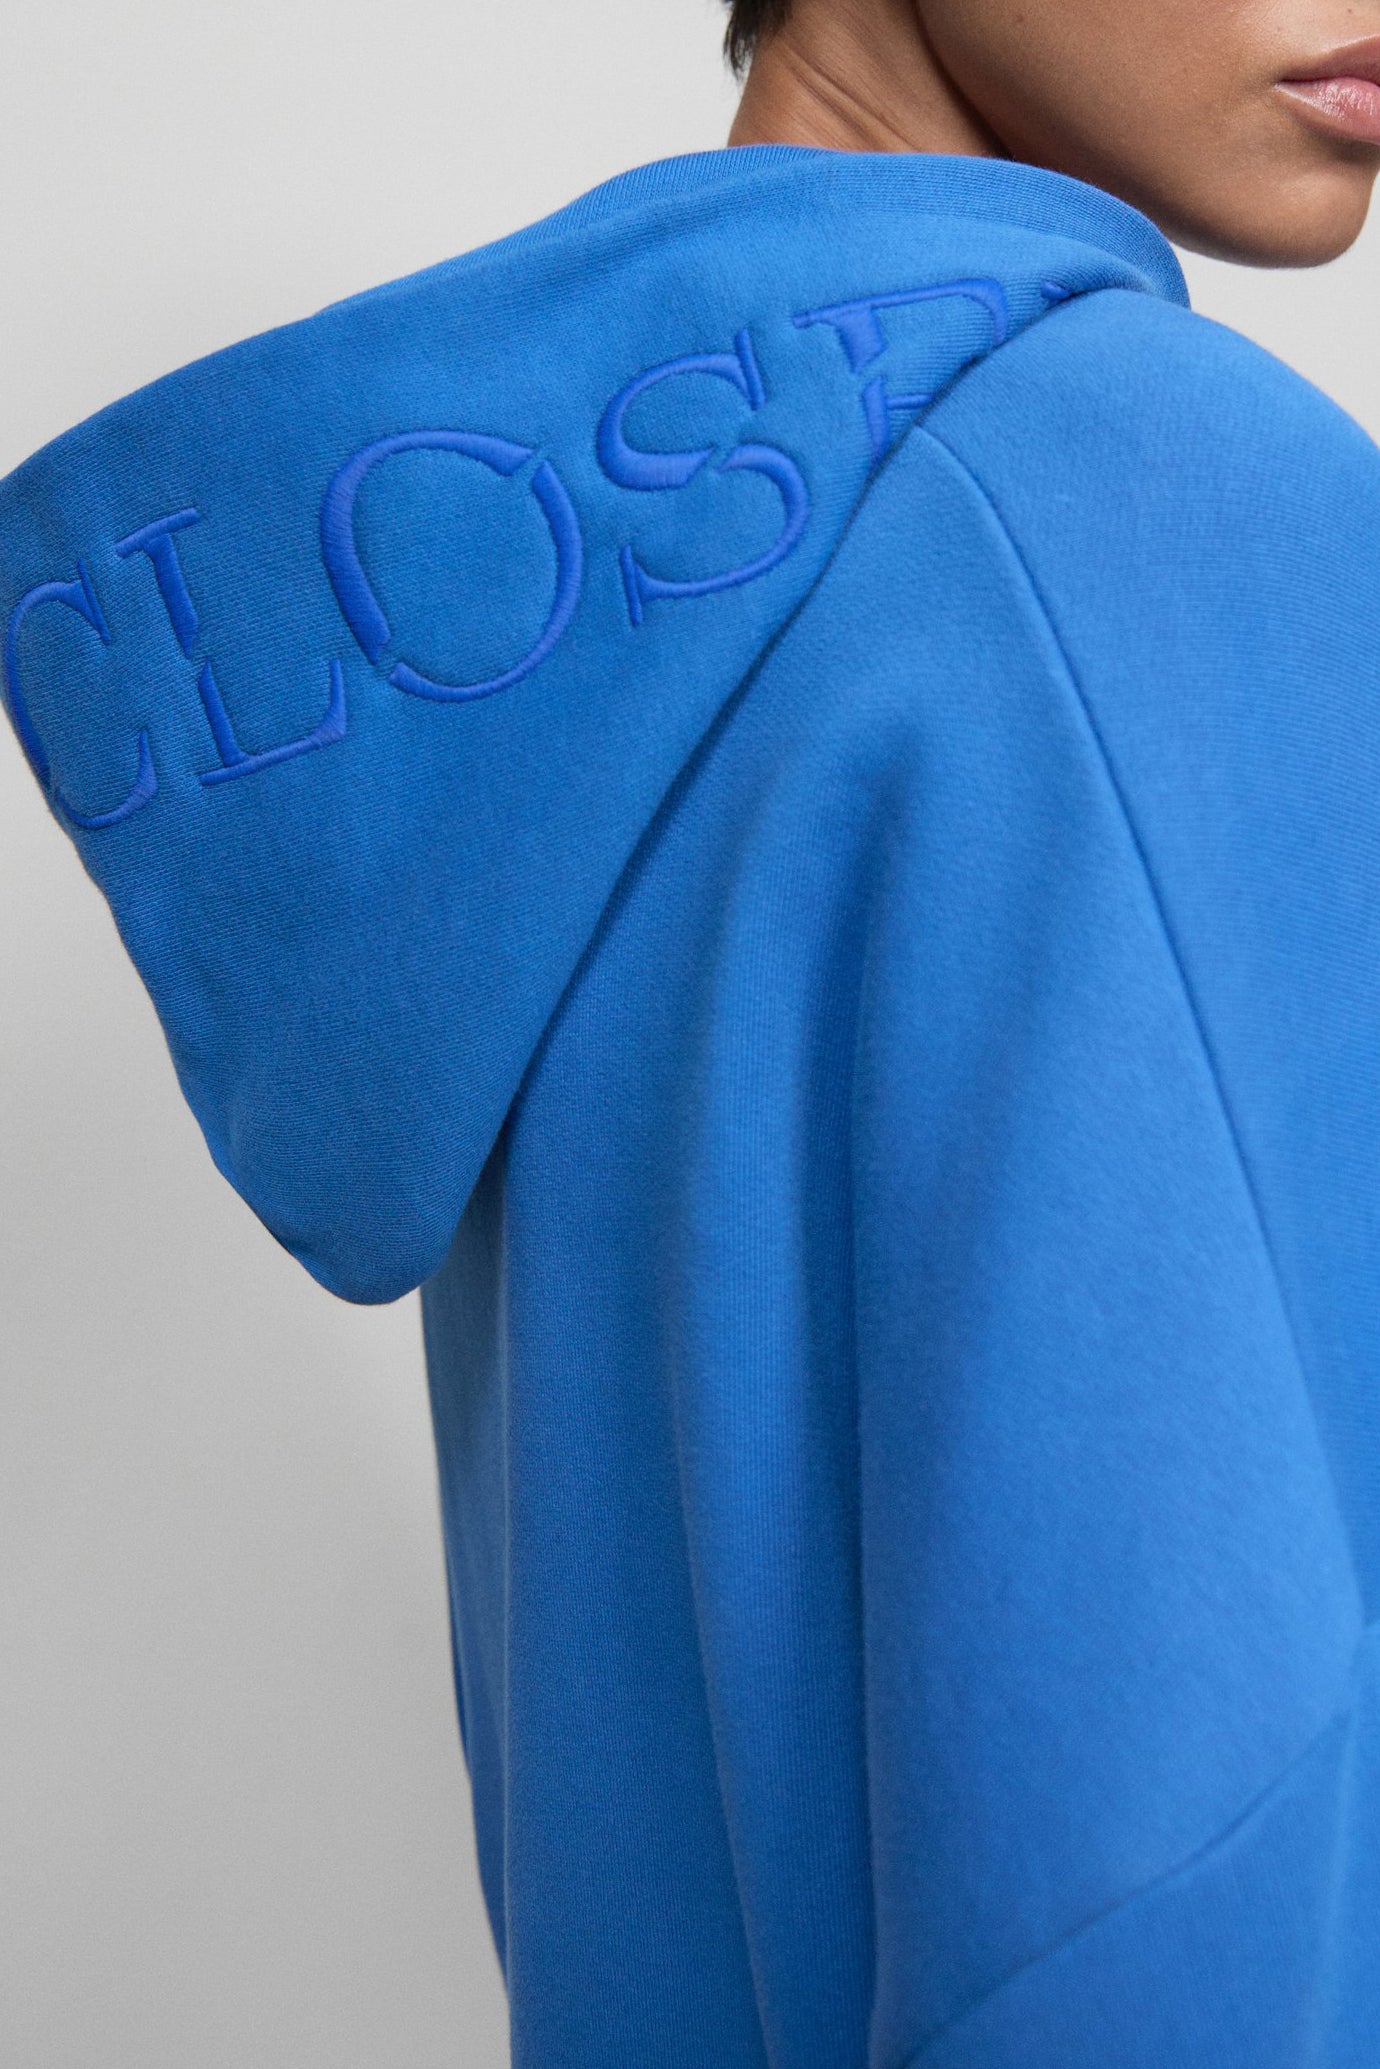 Hoodie in Lake BlueClosed - Anita Hass